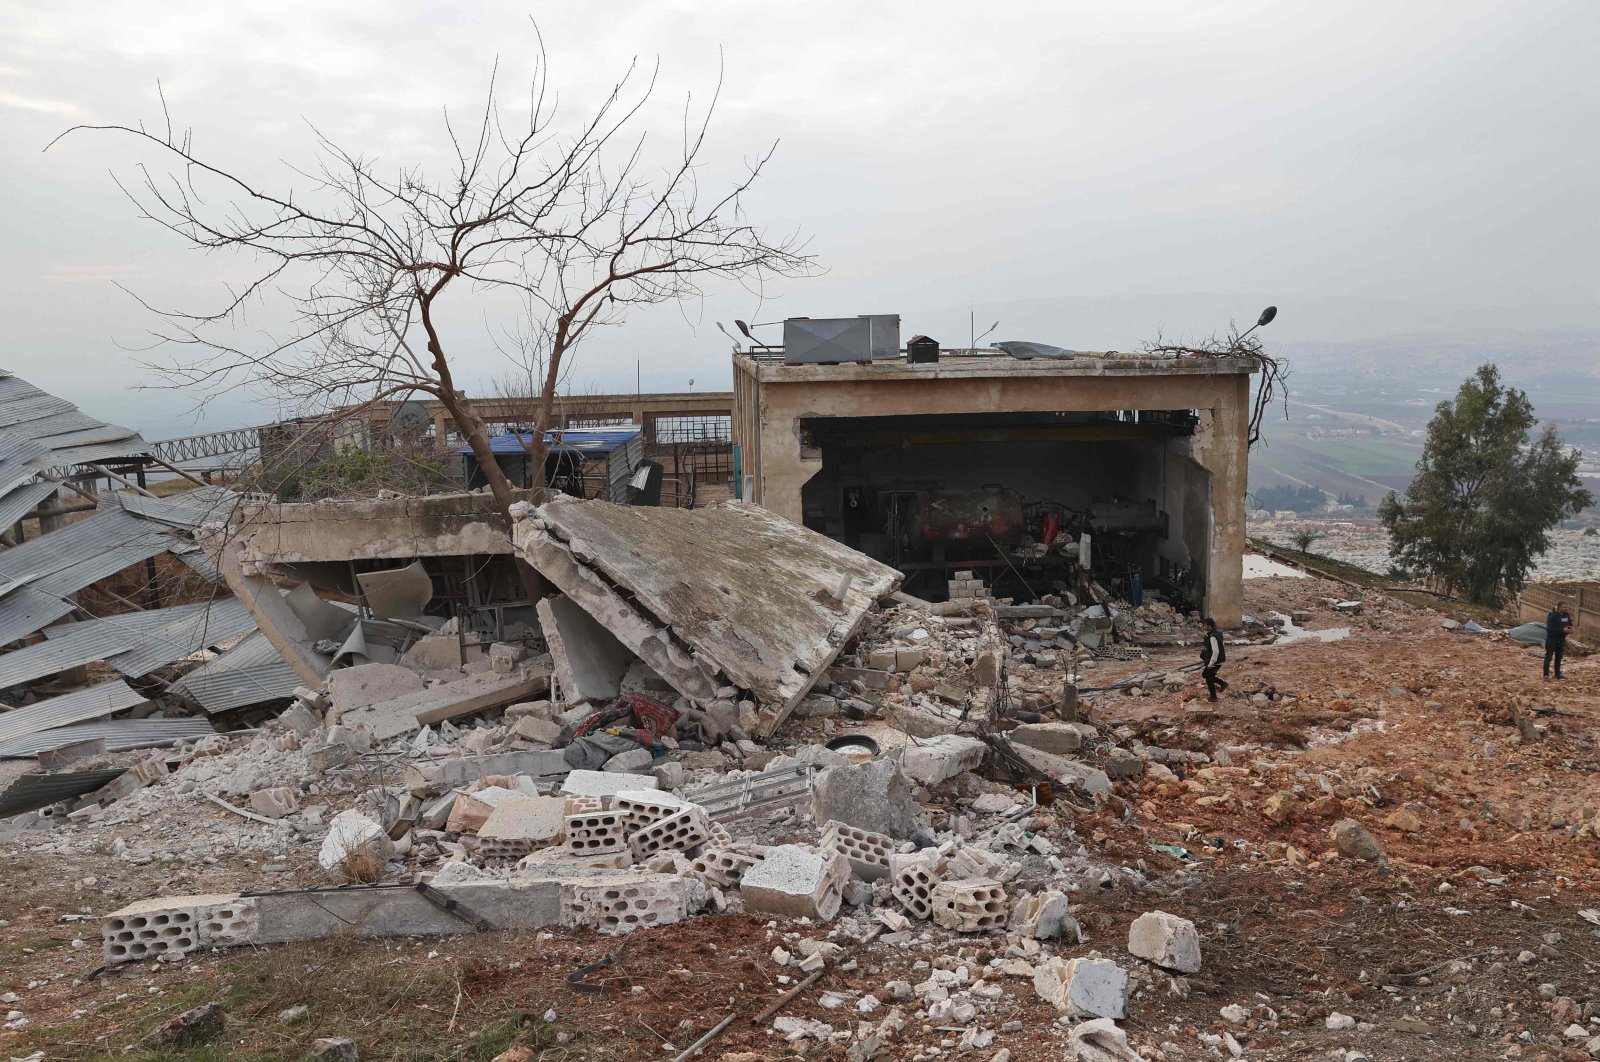 People assess the damage at the Al-Arshani water station after it was reportedly hit by a Russian airstrike, northeast of the city of Idlib, Syria, Jan. 2, 2022. (AFP Photo)